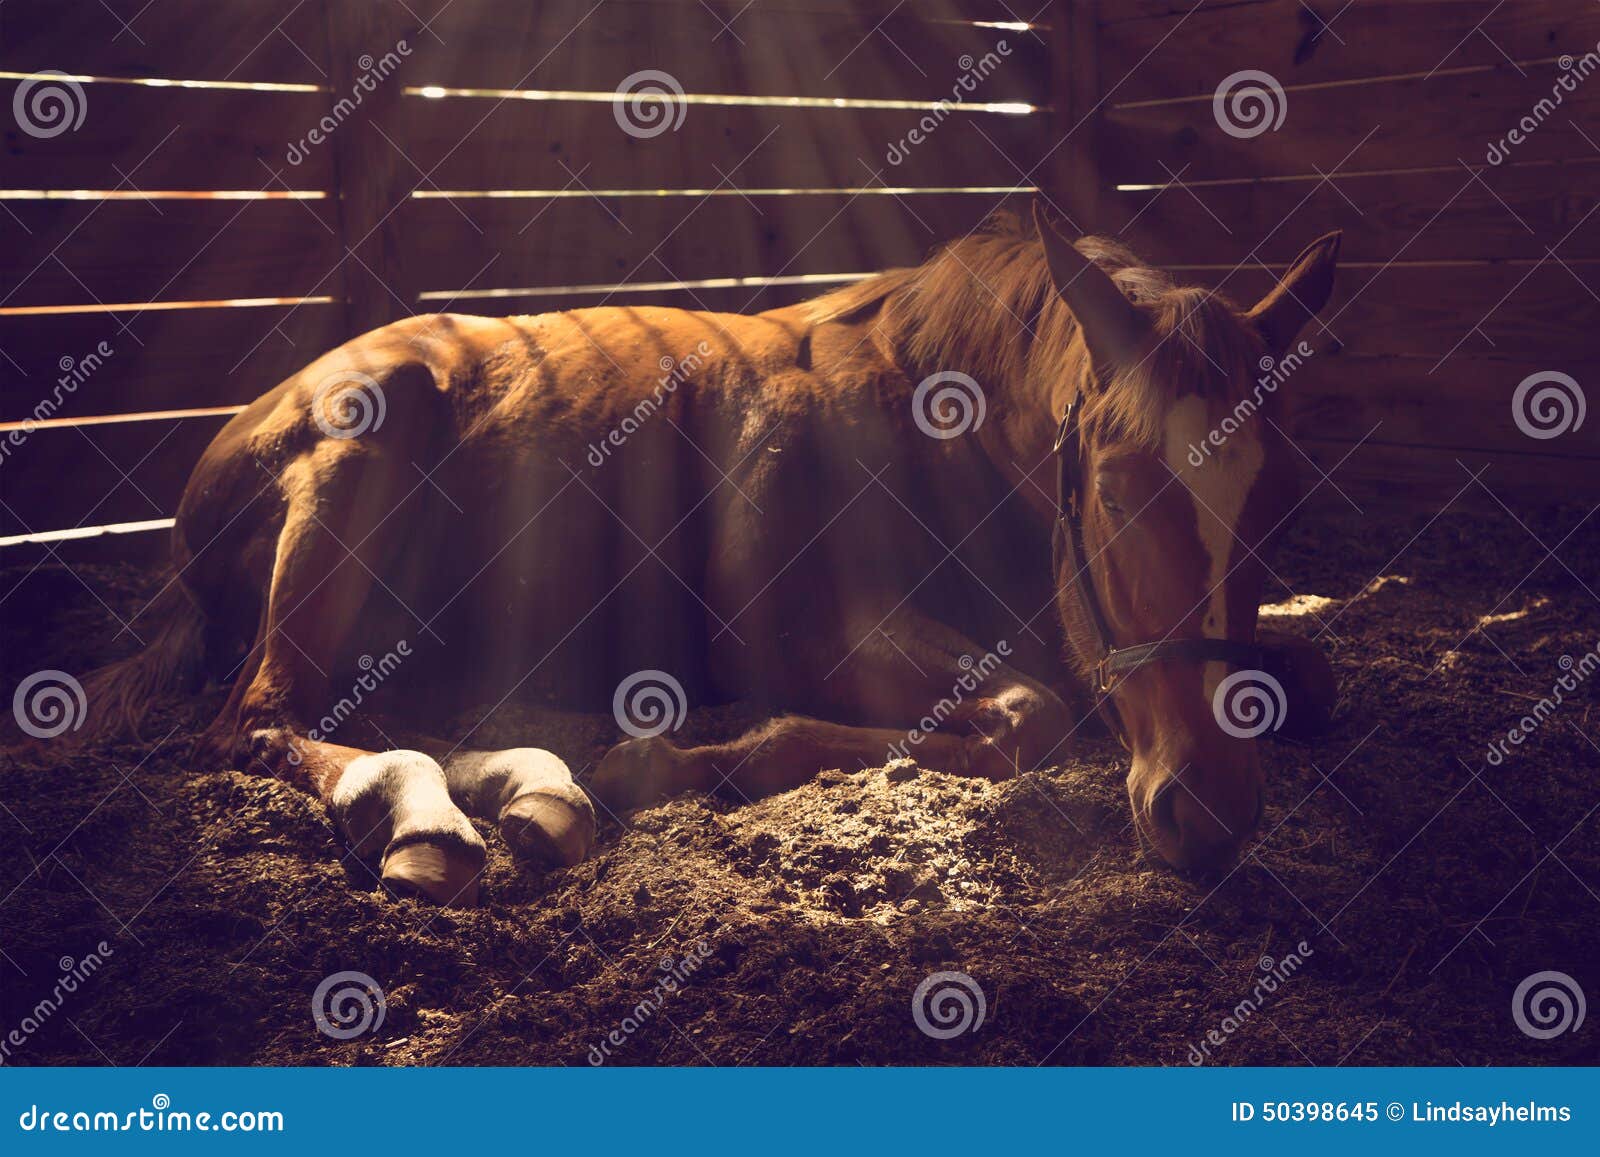 horse lying down in stall